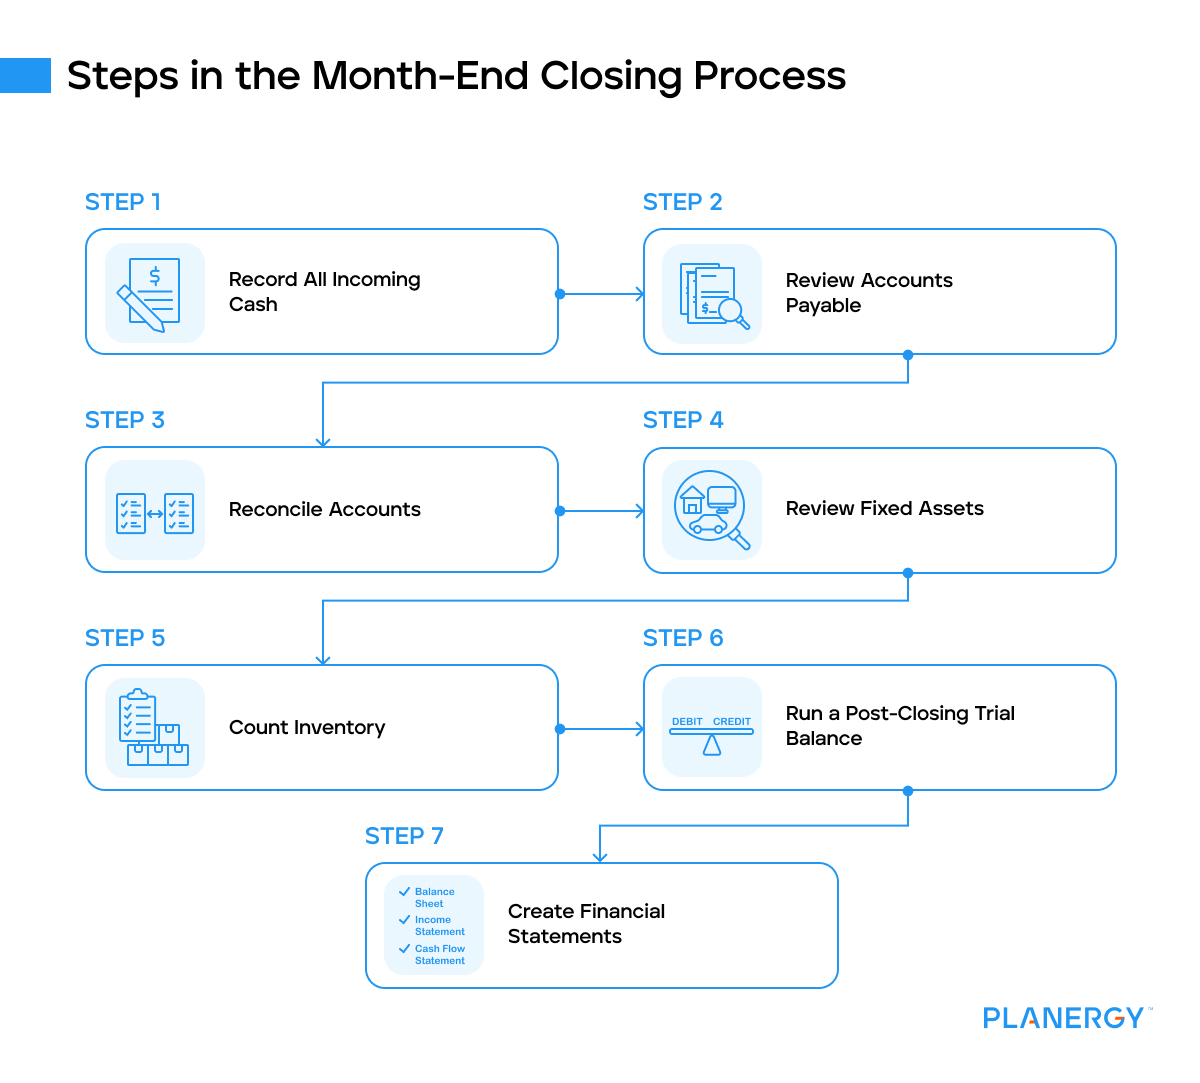 Steps in the month-end closing process